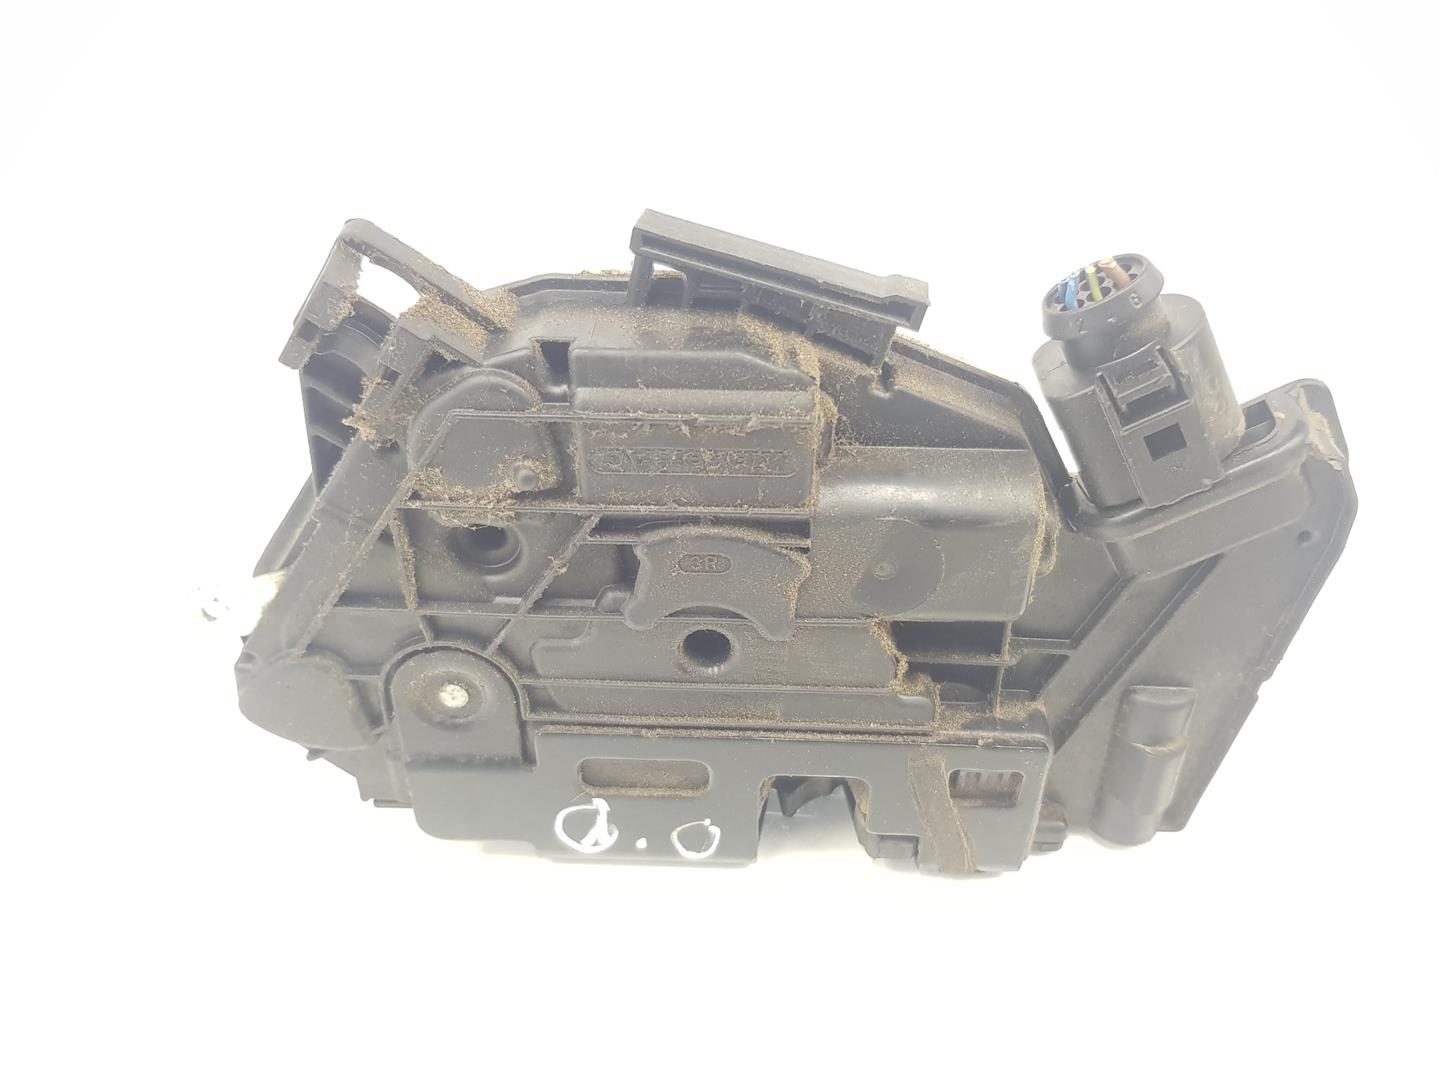 SEAT Ibiza 4 generation (2008-2017) Front Right Door Lock 5N1837016A, 5N1837016A 24243511